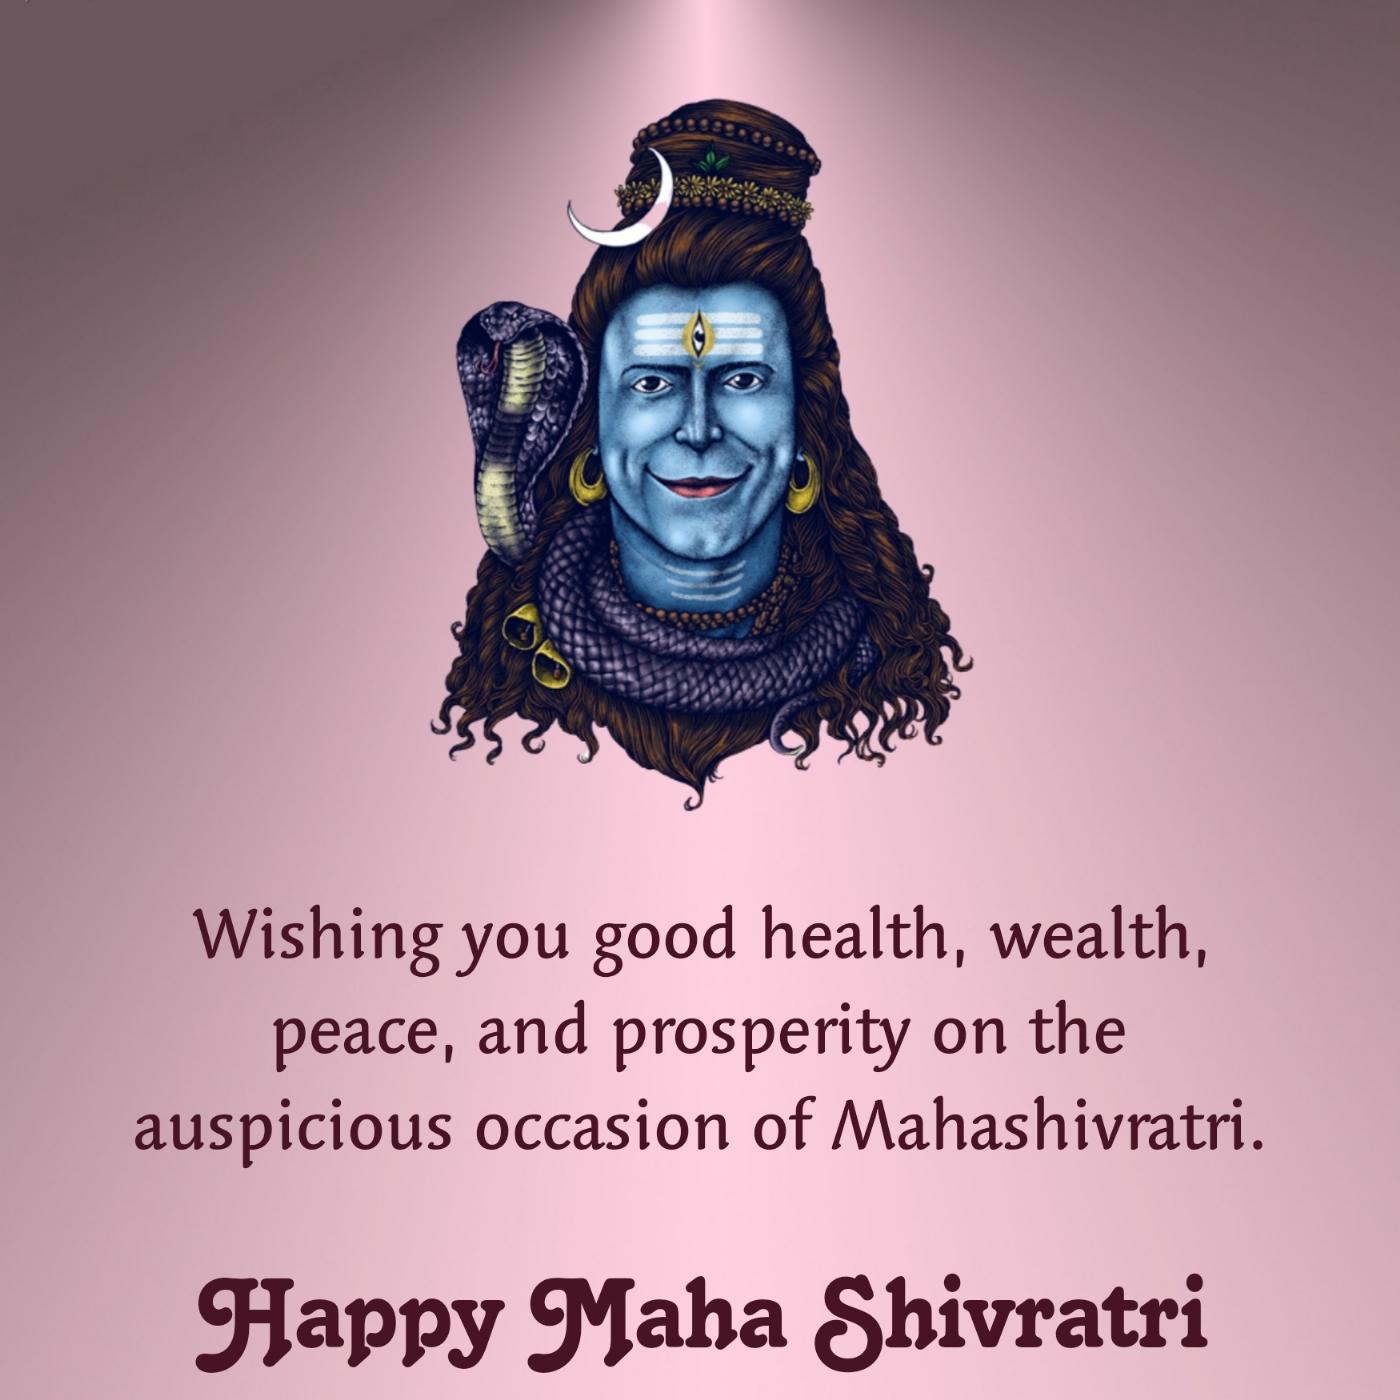 Wishing you good health wealth peace and prosperity